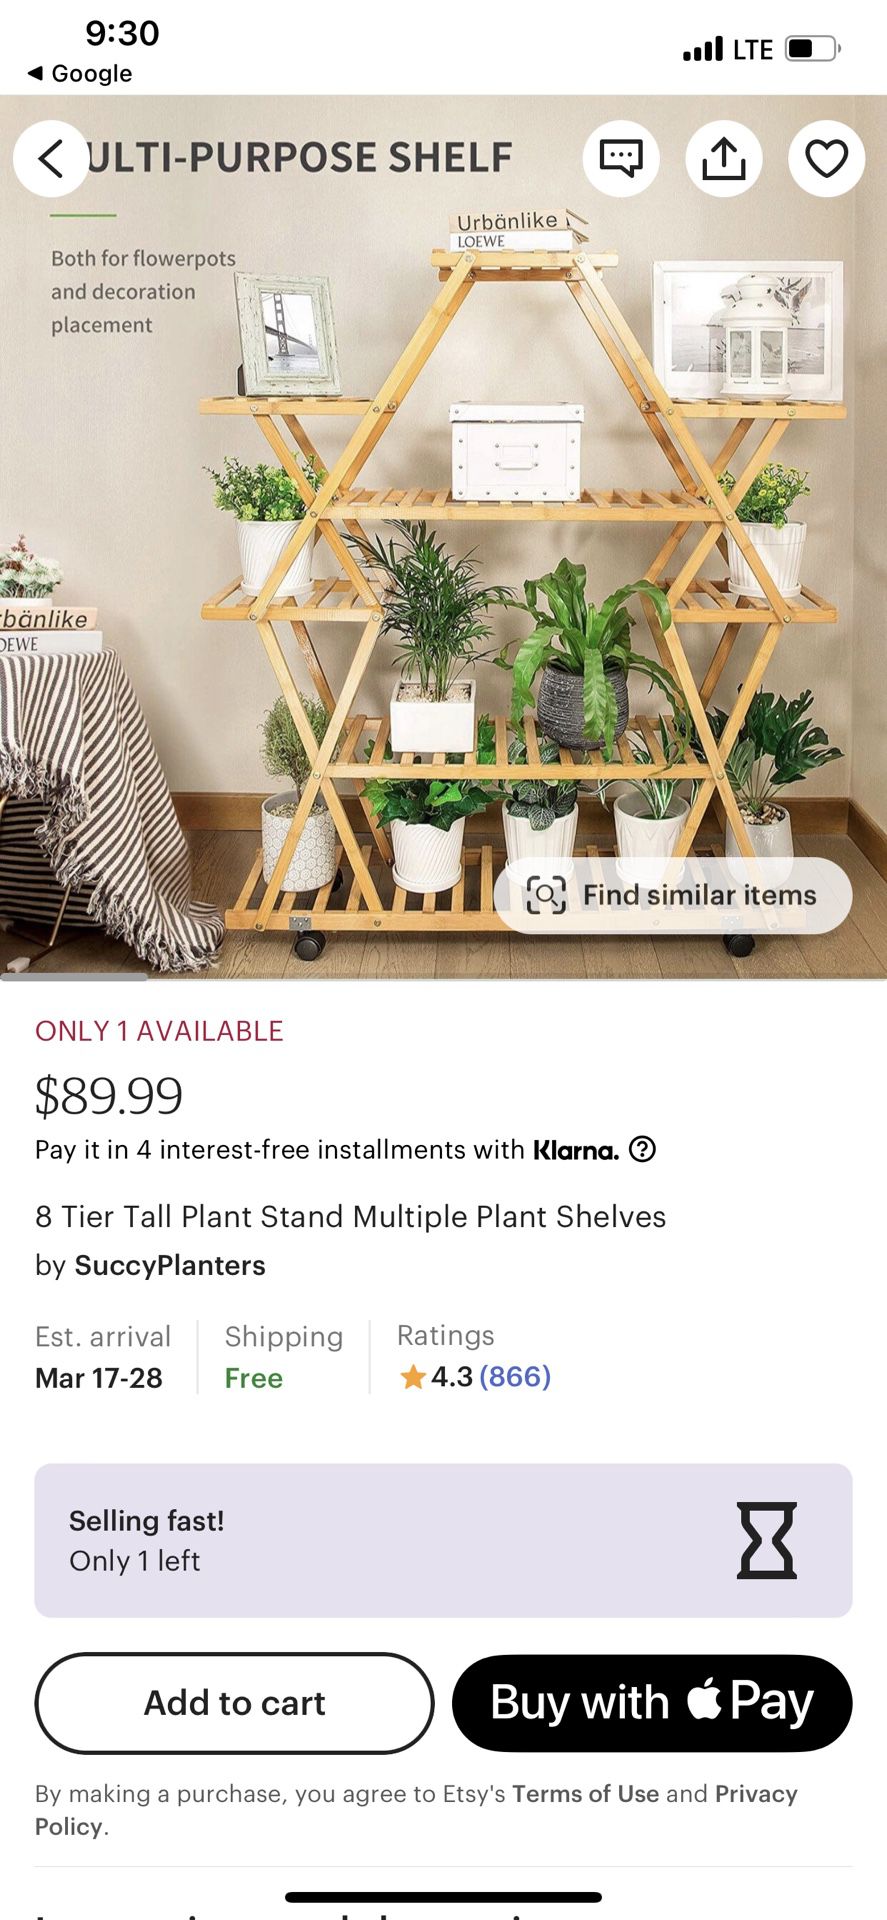 Brand New In Box Plant Stand, Large Capacity Bamboo Plant Stand 8 Tier Tall Plant Stand Multiple Plant Shelves Steady Flower Stand Plant Stands for In